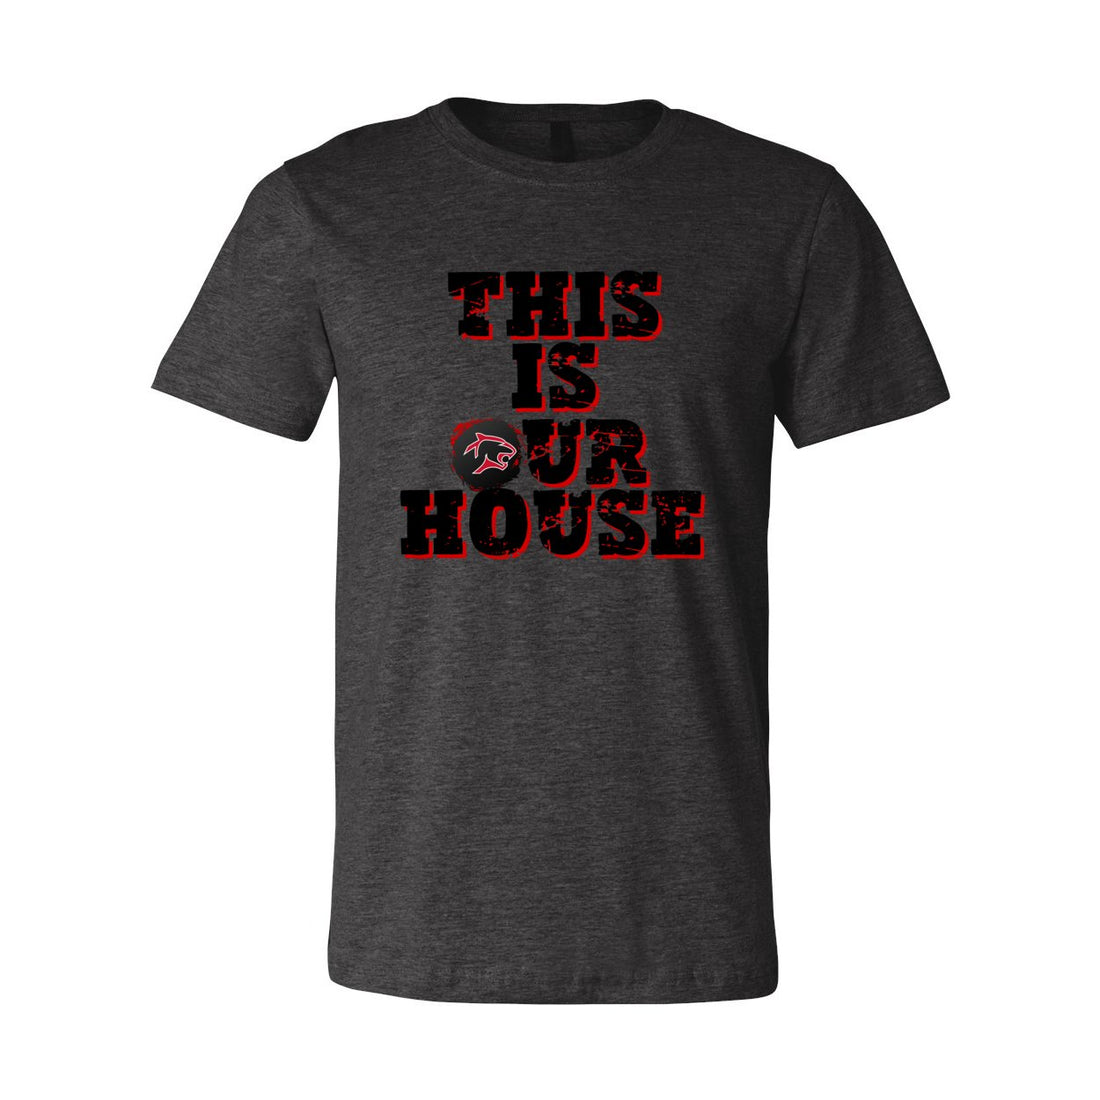 Our House Panthers Short Sleeve Jersey Tee - T-Shirts - Positively Sassy - Our House Panthers Short Sleeve Jersey Tee